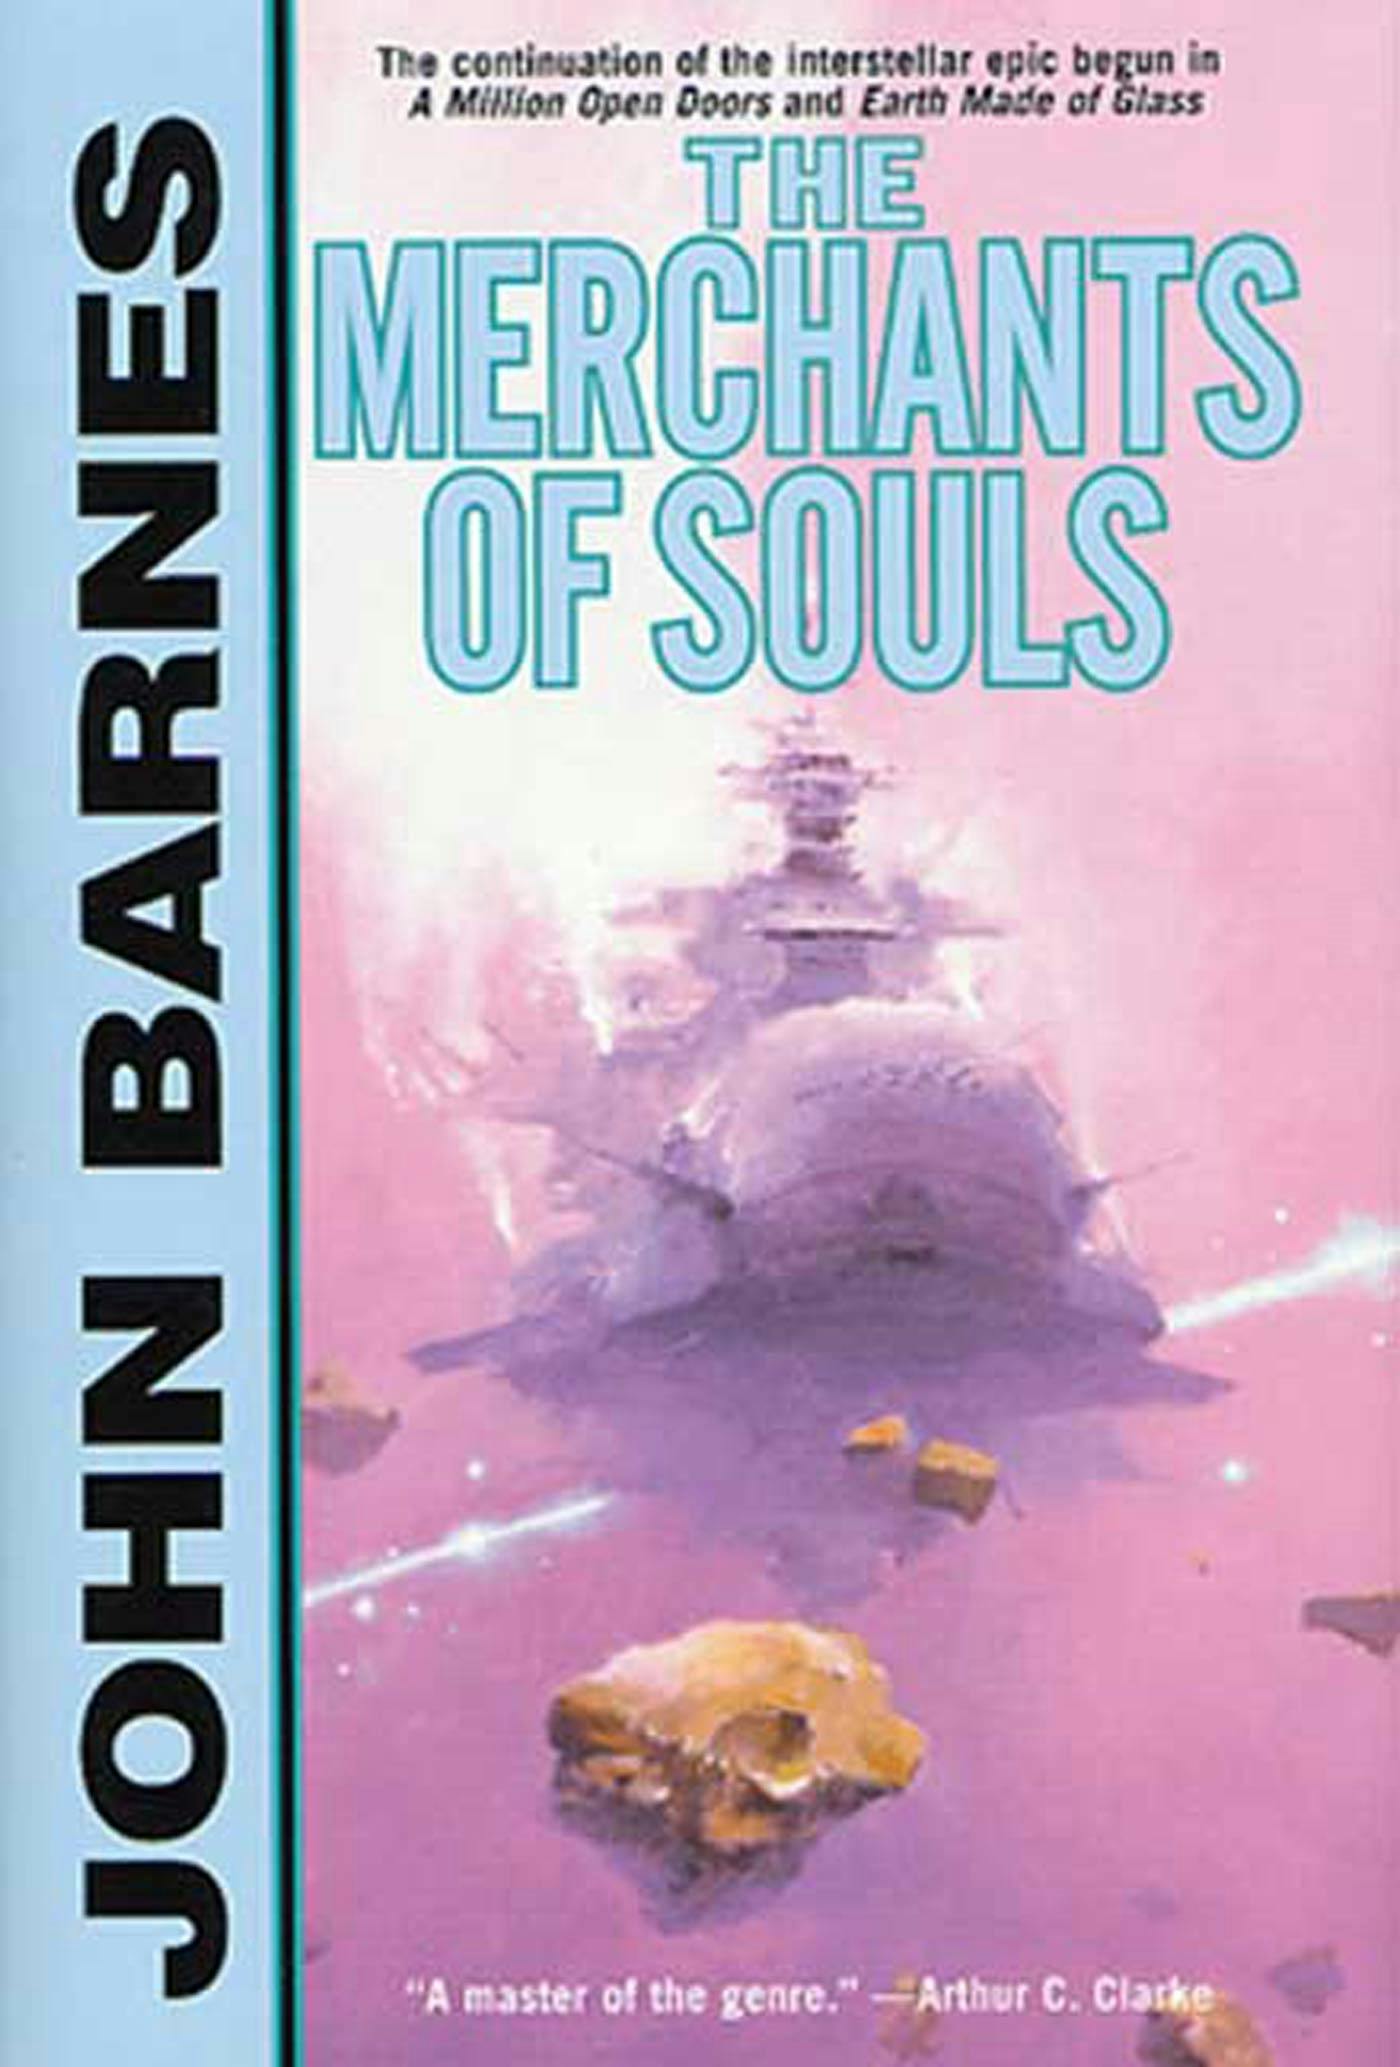 Cover for the book titled as: The Merchants of Souls